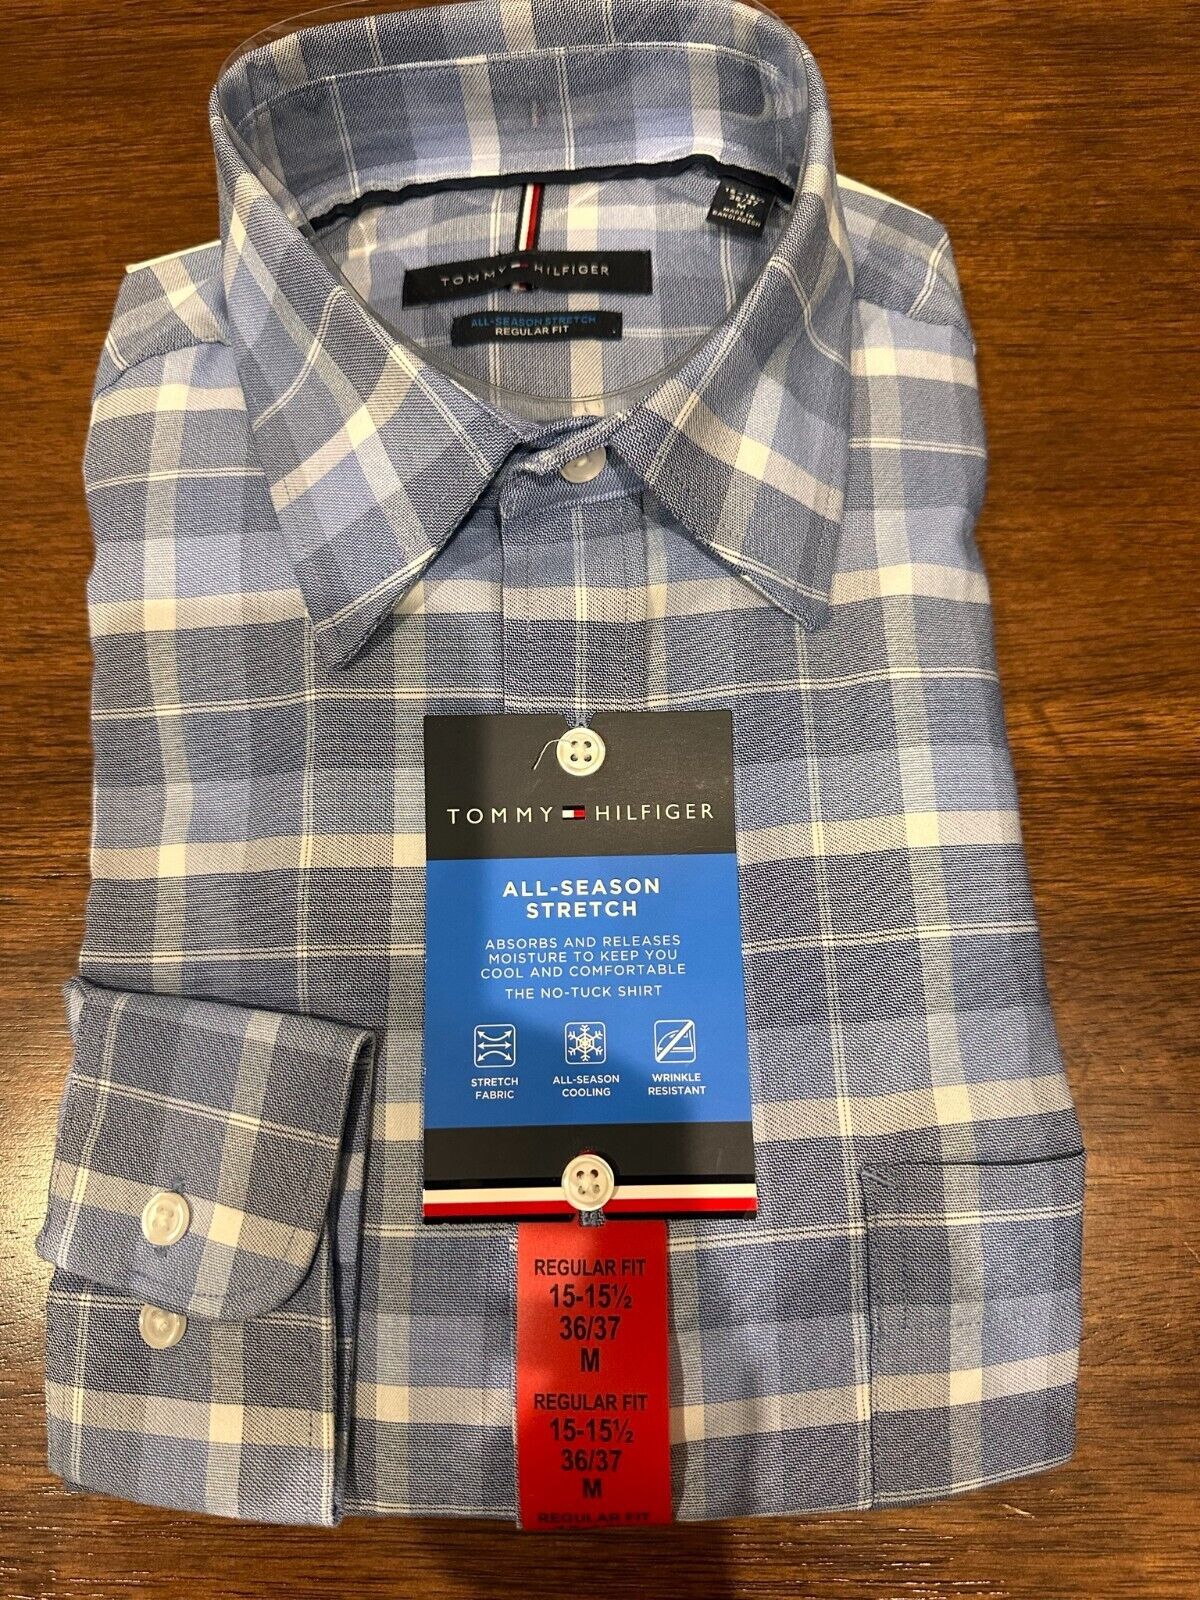 TOMMY HILFIGER Mens Red Check Collared Slim Fit Dress Shirt M 15- 34/35 